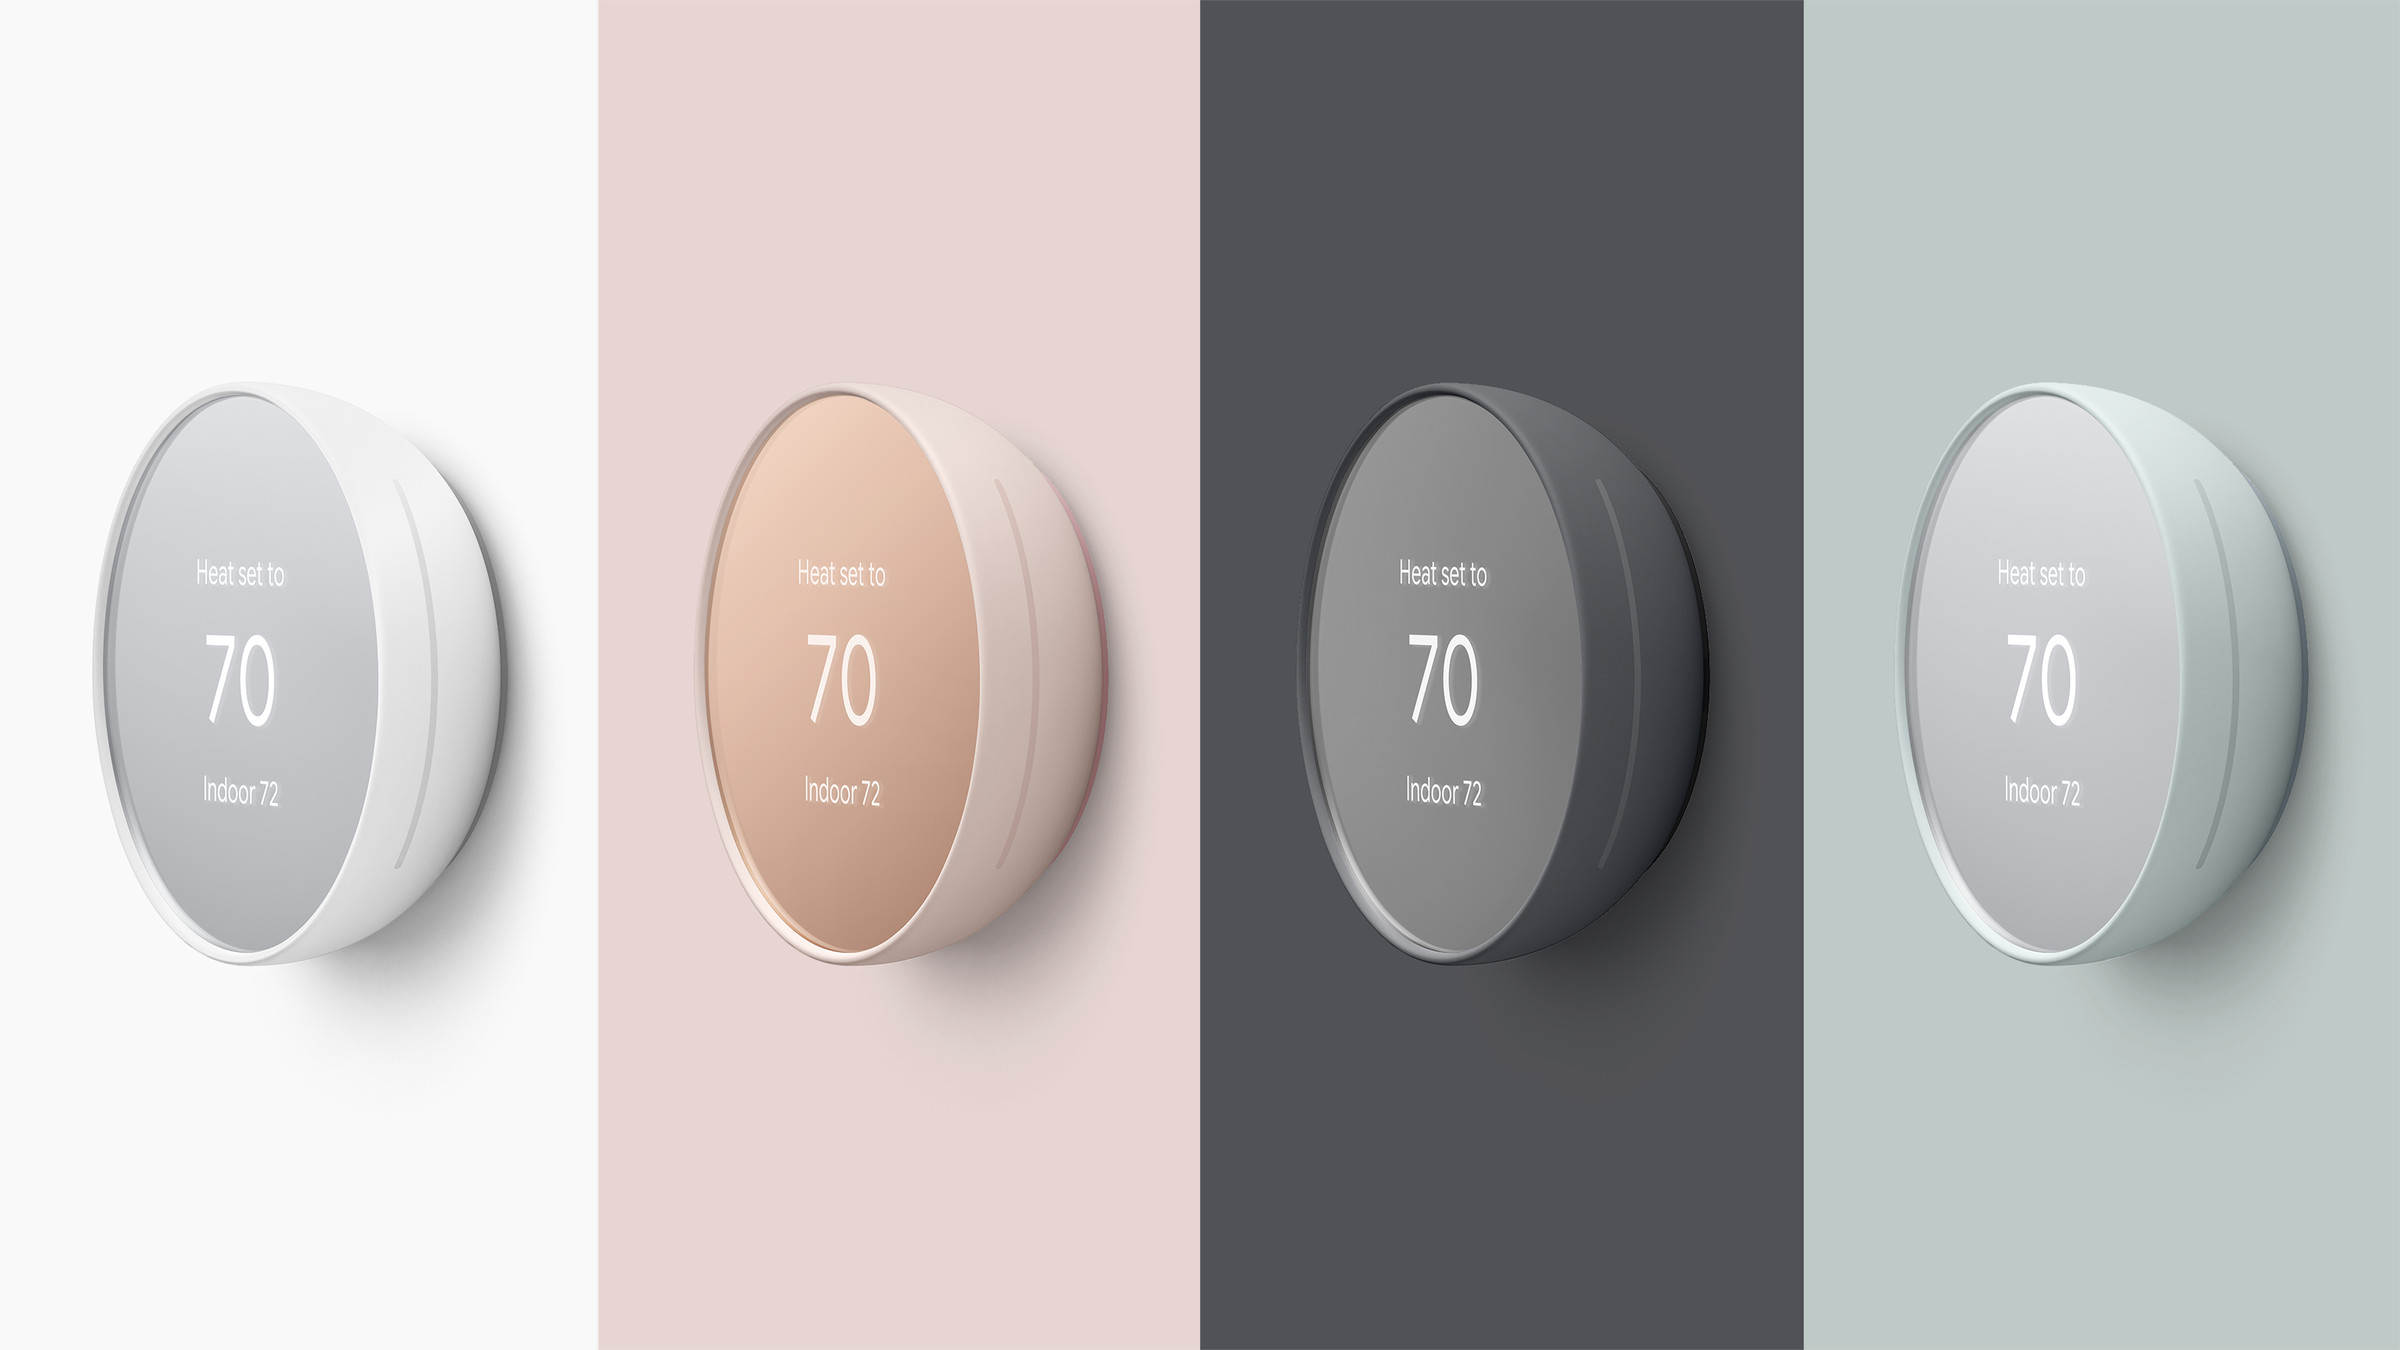 The new Nest Thermostat has a mirrored front and comes in four different colors